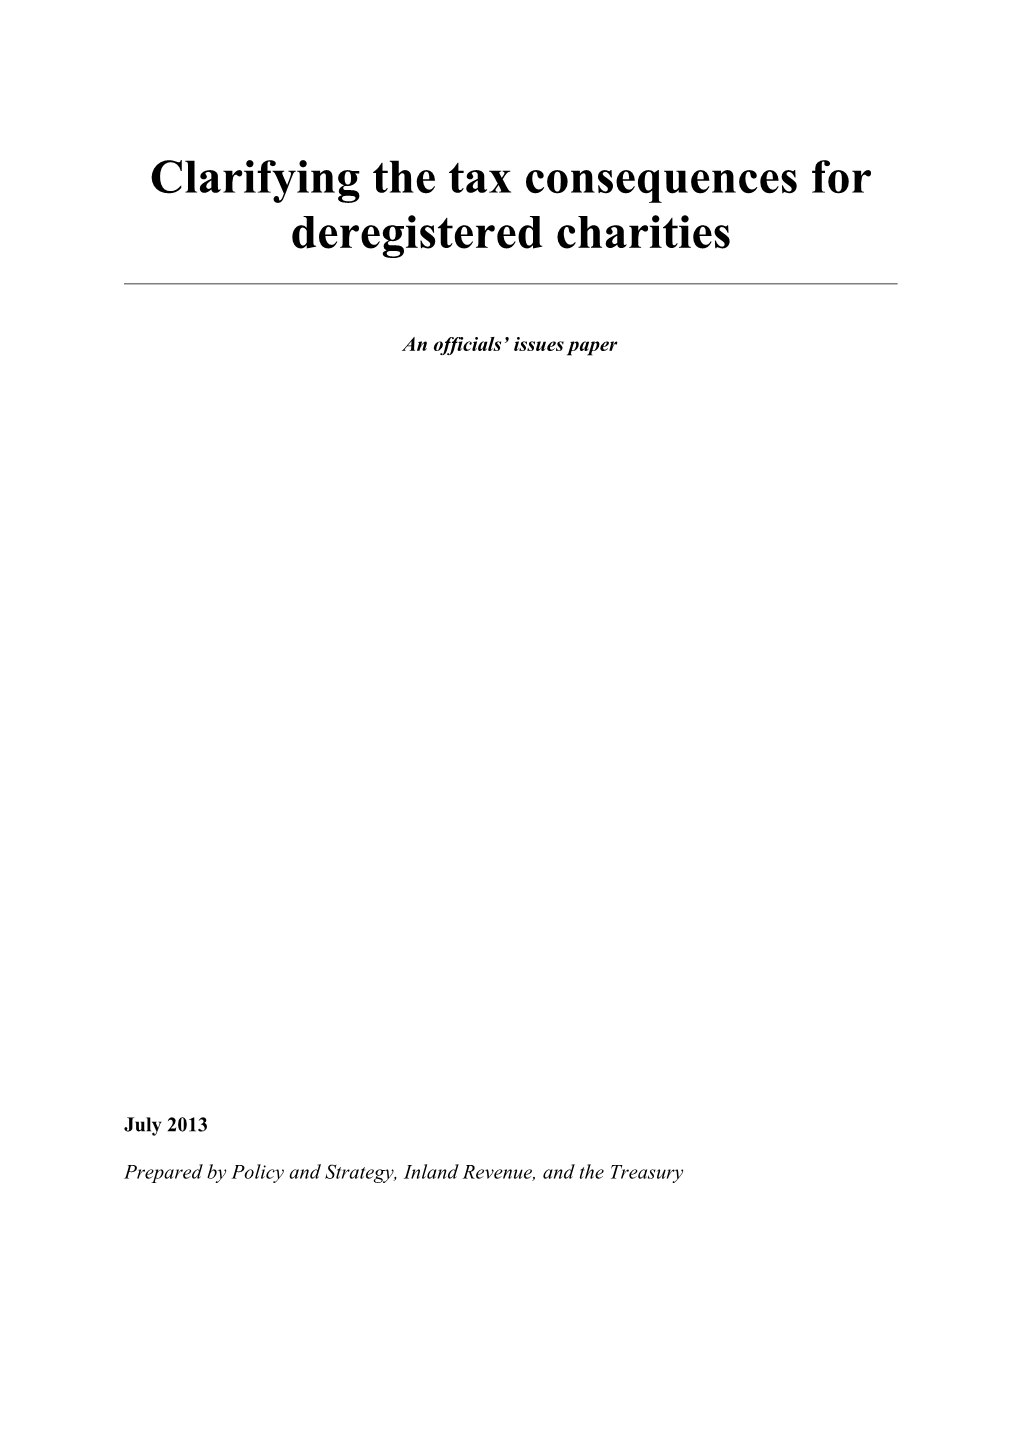 Clarifying the Tax Consequences for Deregistered Charities - an Officials' Issues Paper